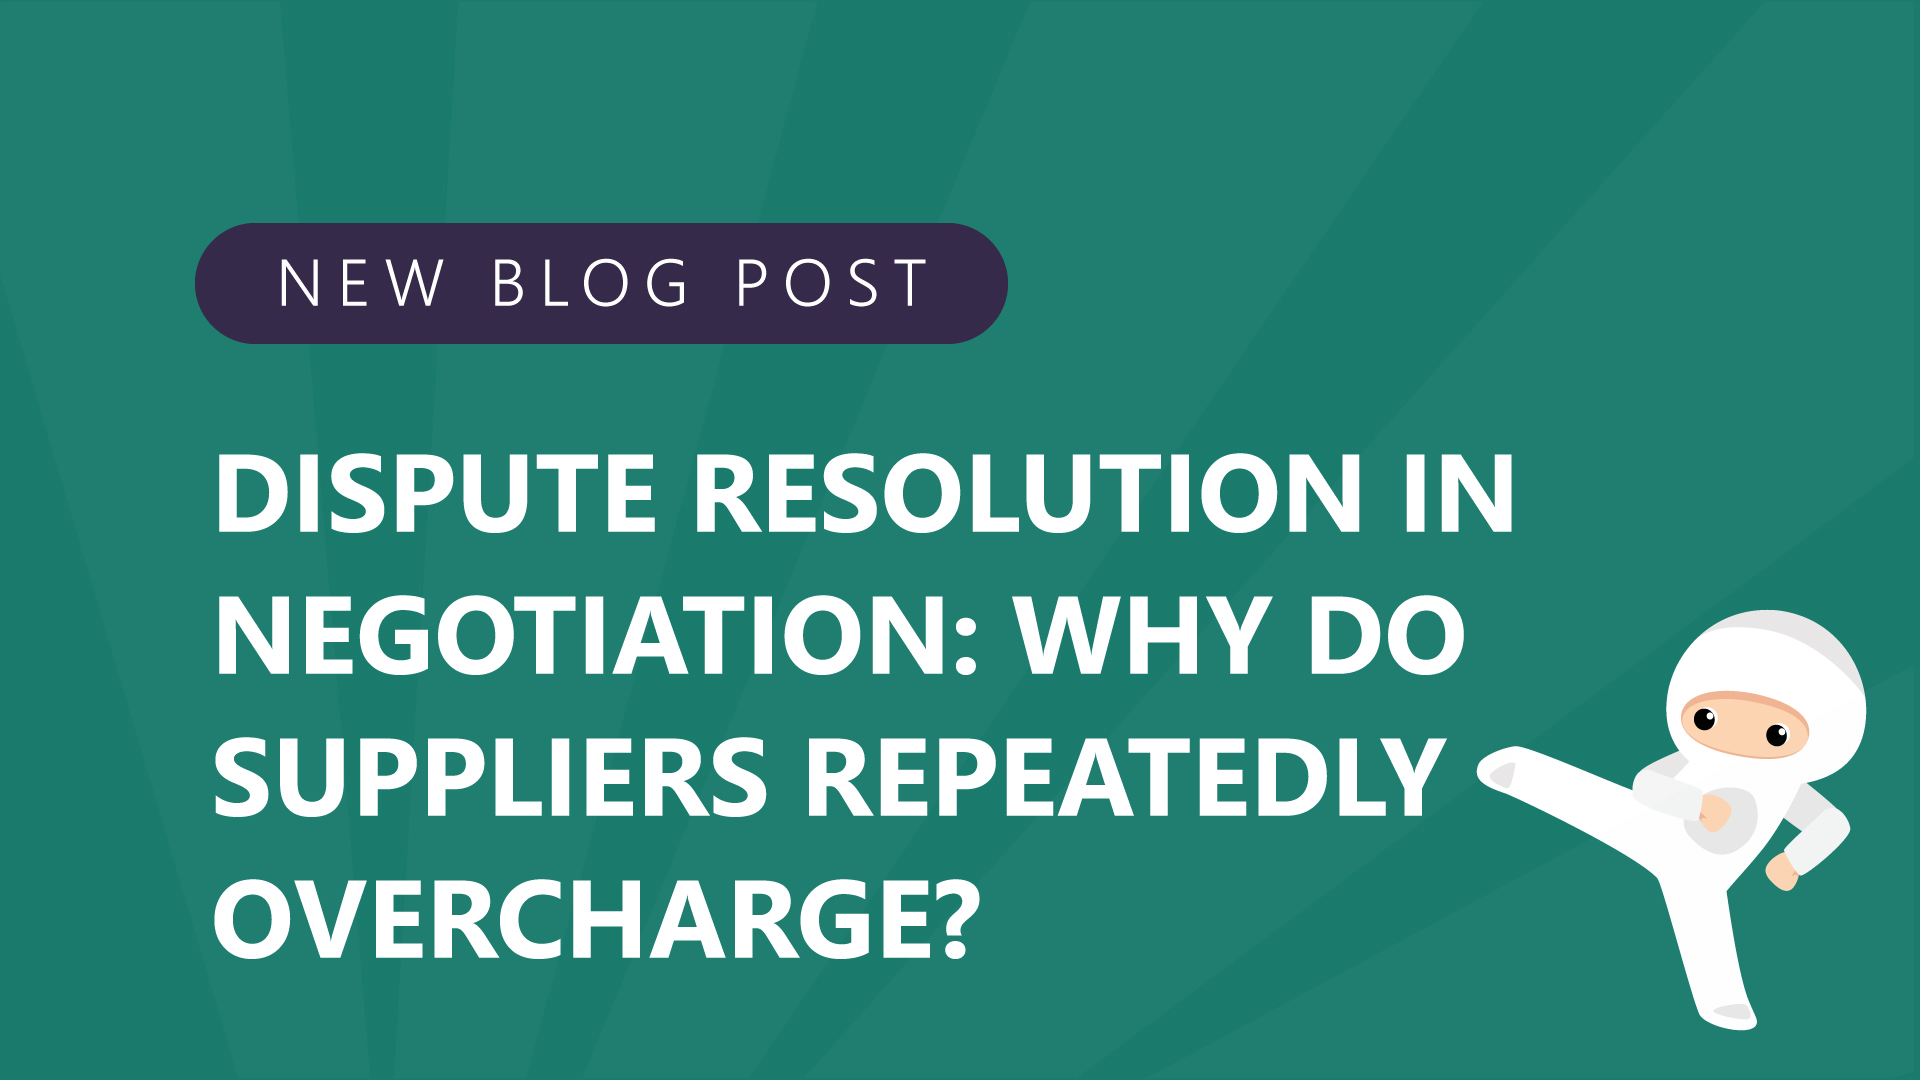 71-ispute-Resolution-in-Negotiation-Why-do-Suppliers-Repeatedly-Overcharge.jpg